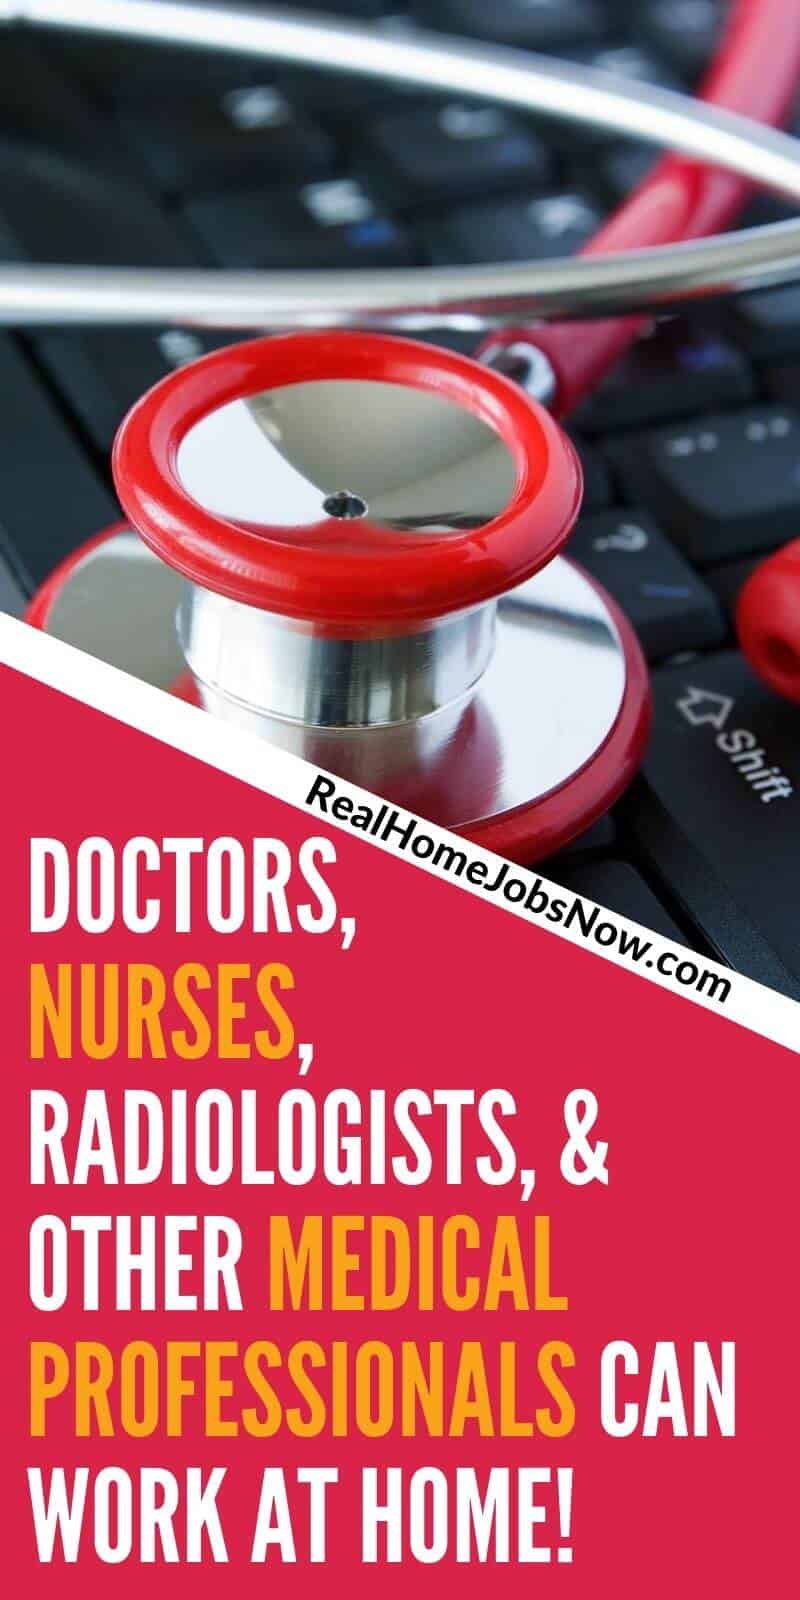 Legitimate medical work from home jobs do exist! From nursing to radiology to case management and more, many companies will hire you to work online from home in the healthcare field.